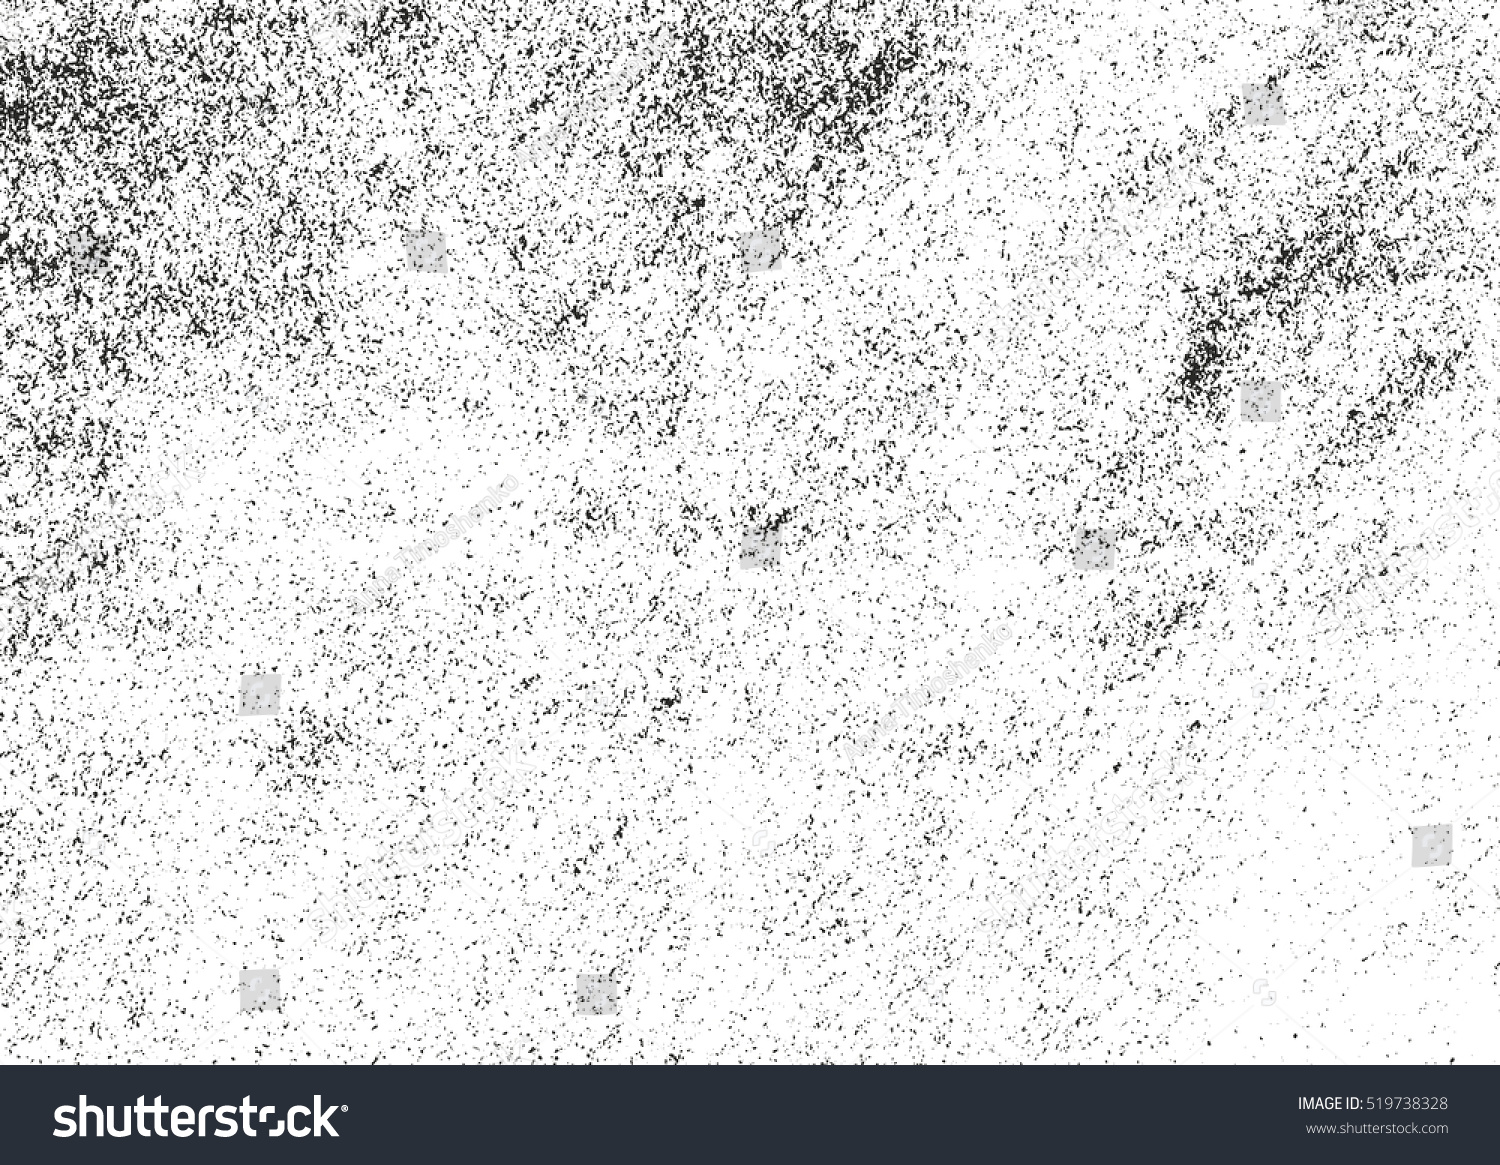 Distressed overlay texture of natural leather, grunge vector background. abstract halftone vector illustration #519738328